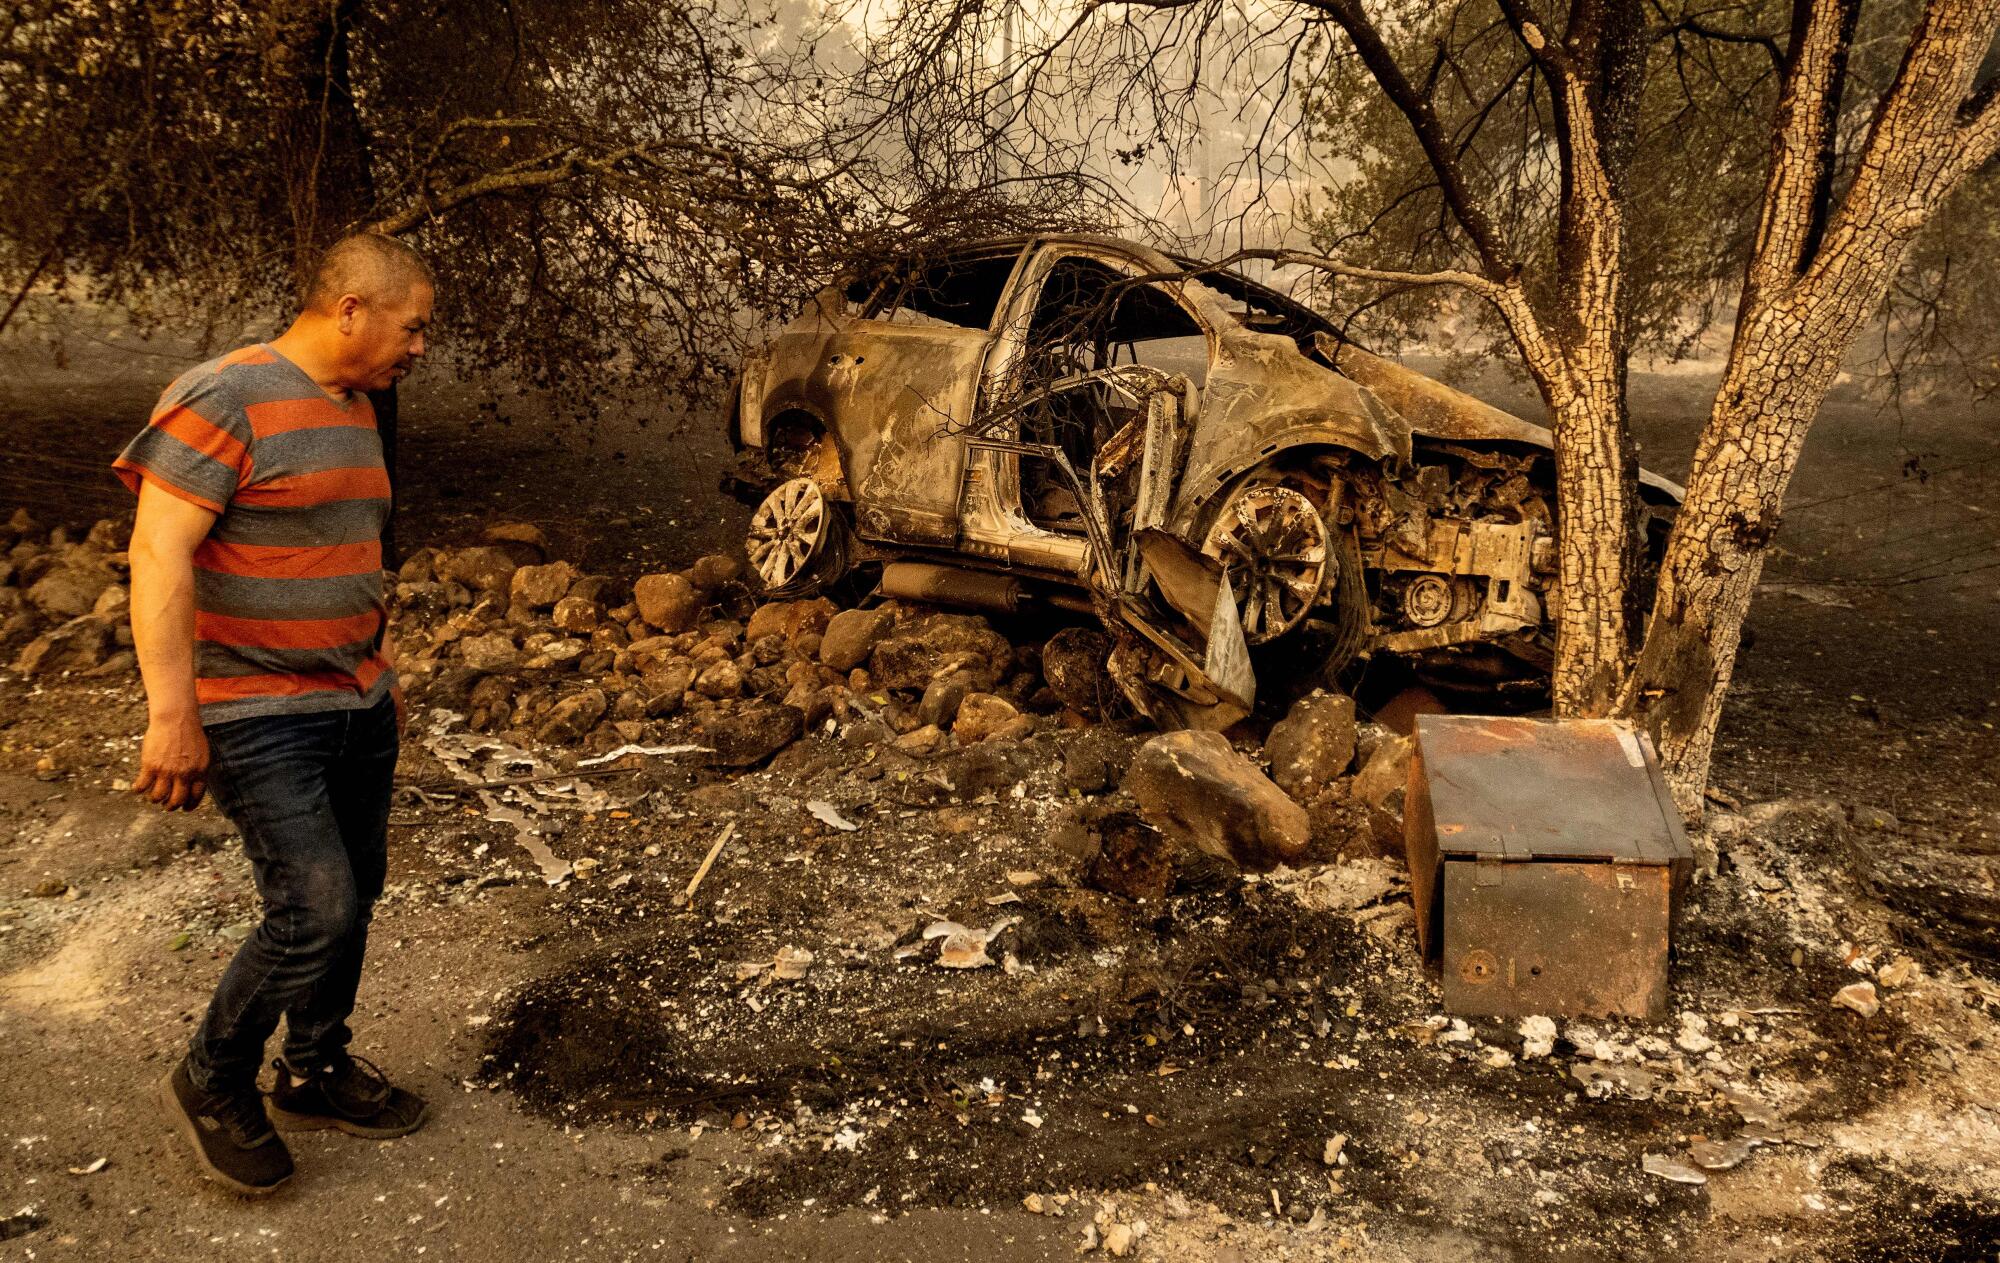 A man stands near a vehicle totally destroyed by fire.